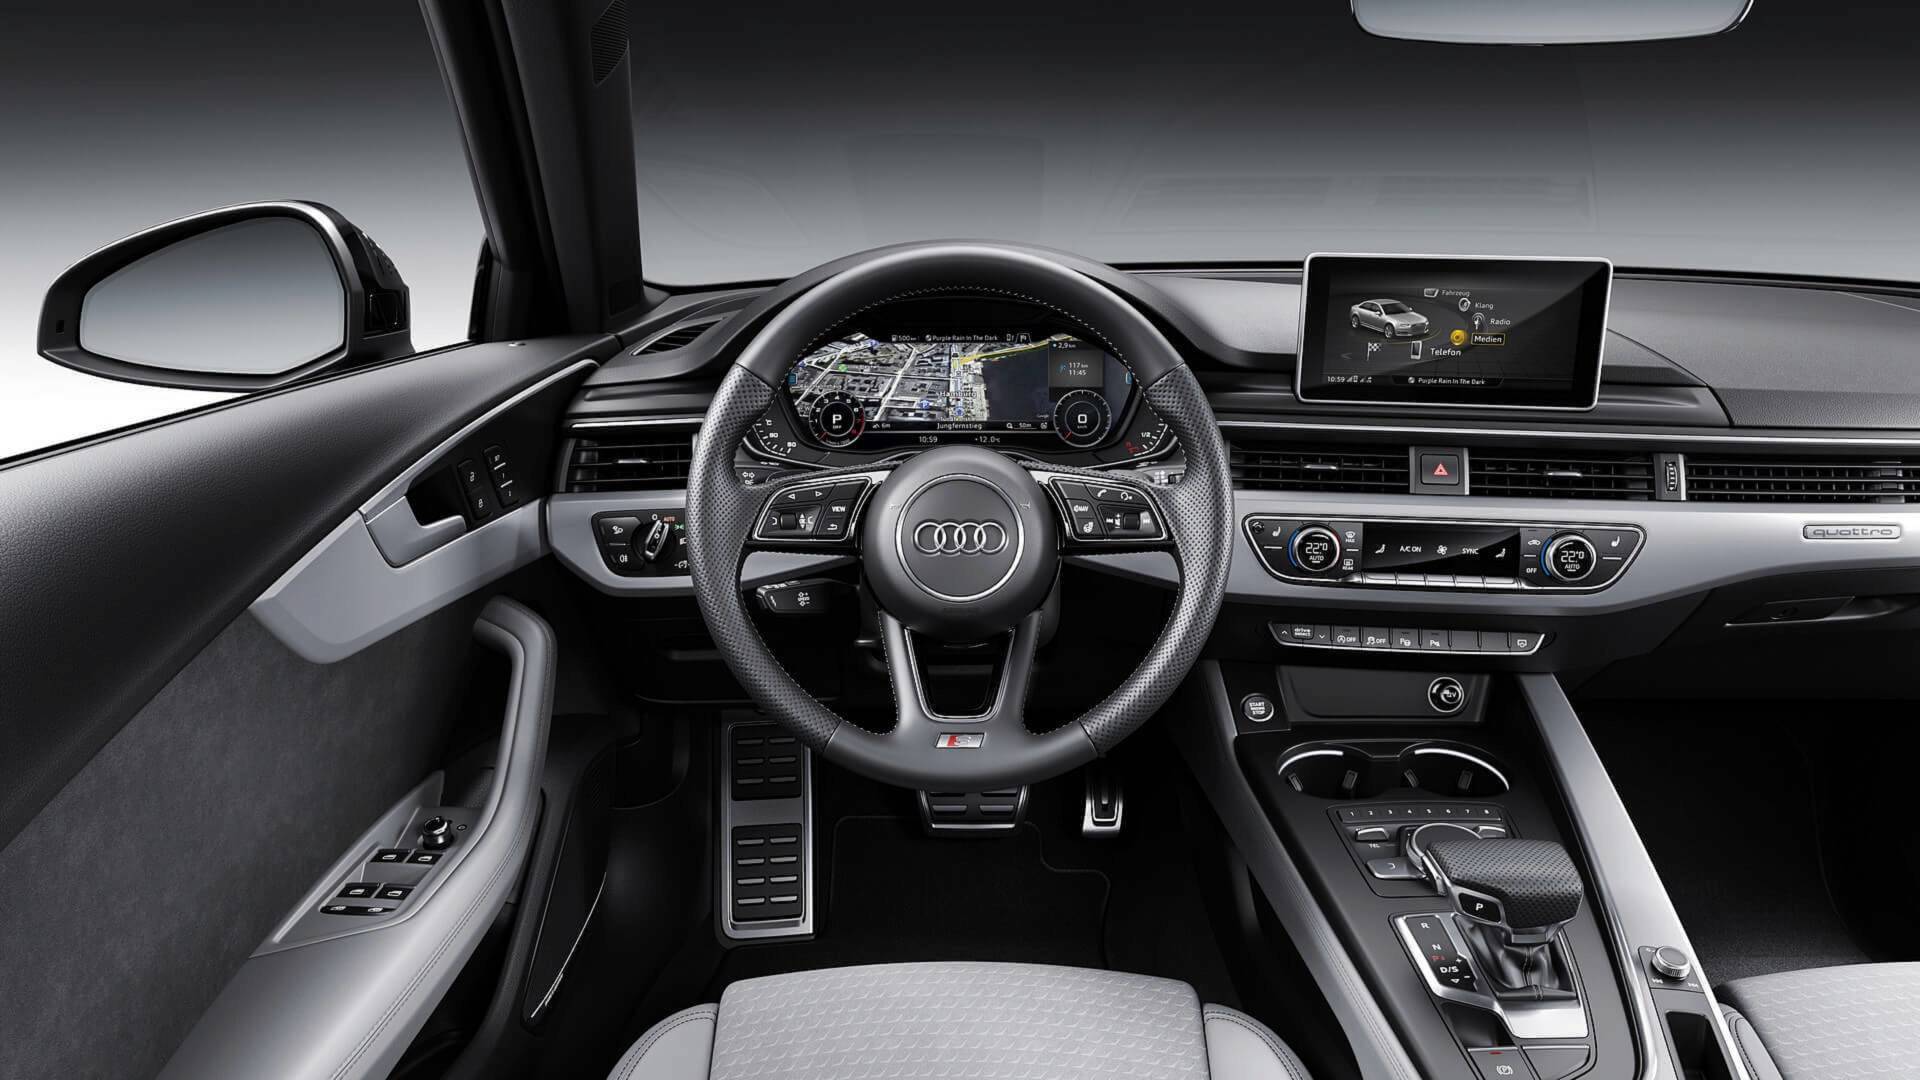 2019 Audi A4, A5 Lose Manual Transmission Option In the United States  autoevolution